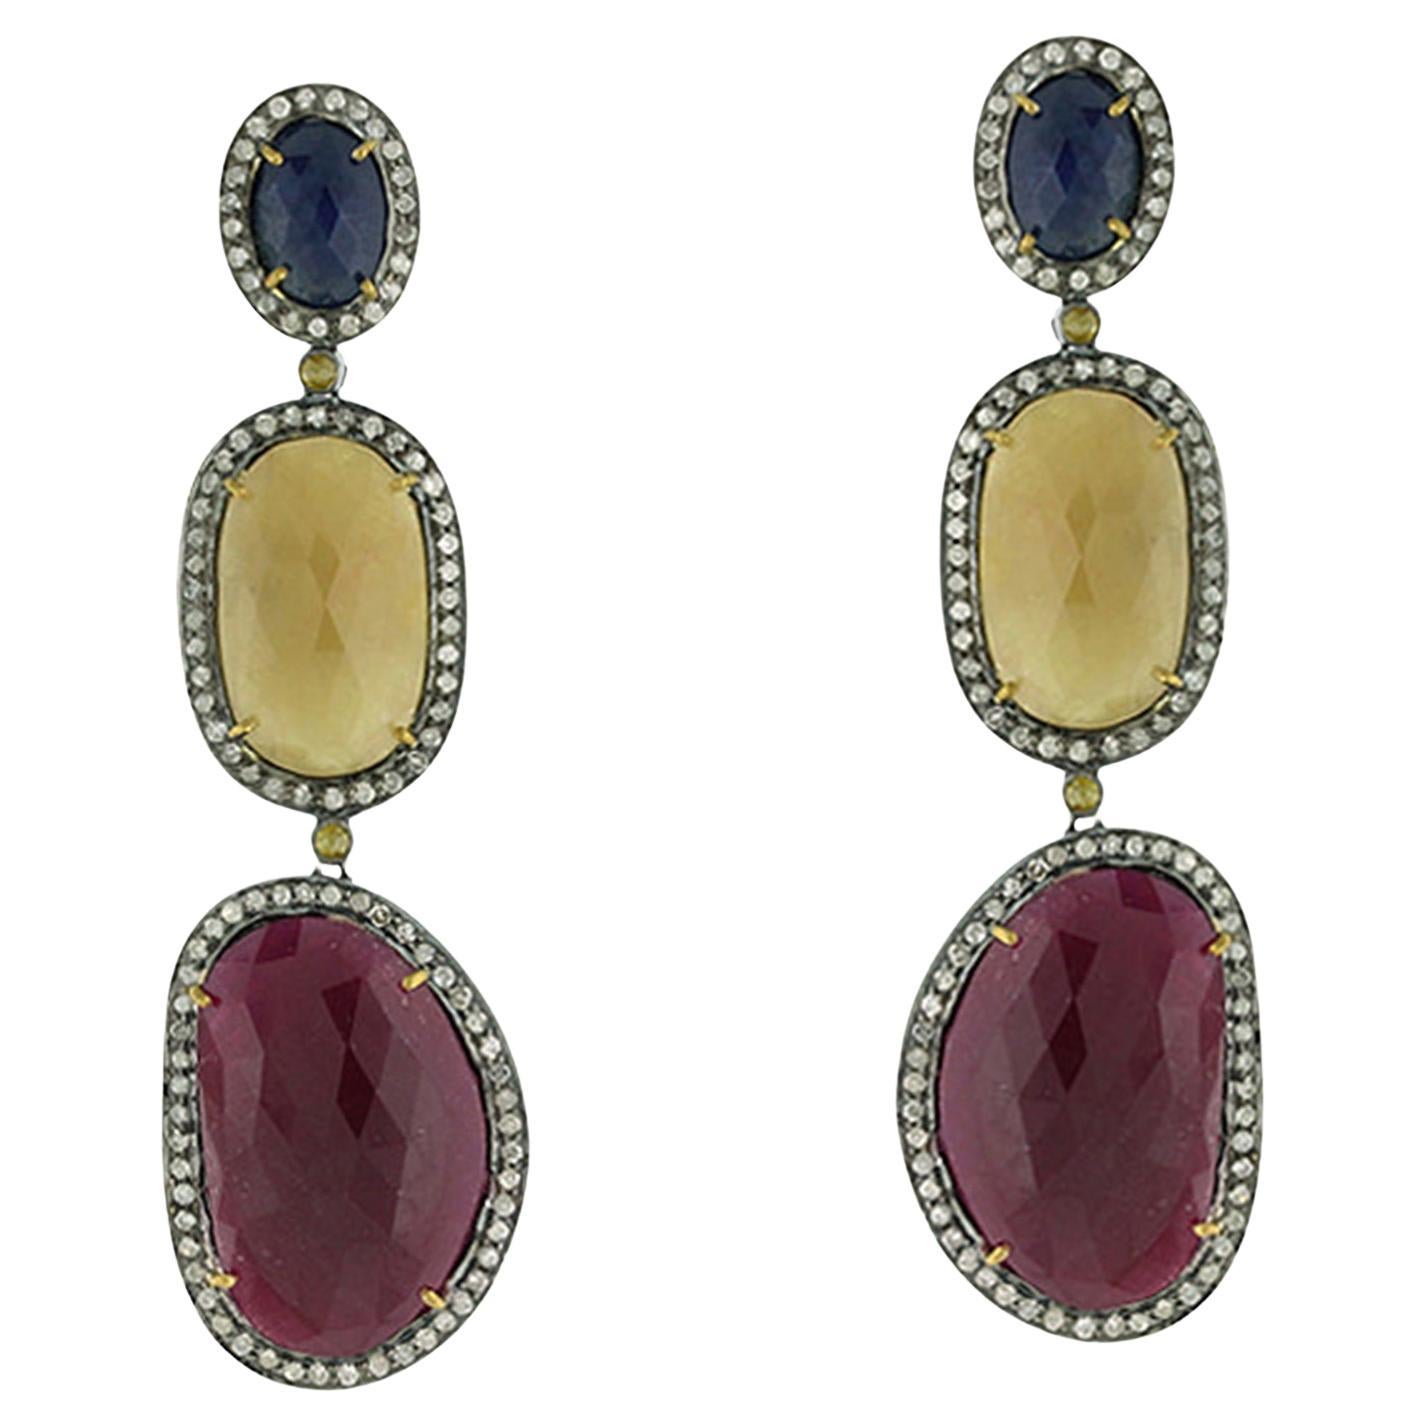 Multigemstone 3 Tier Dangle Earrings With Diamonds Made In 18k Yellow Gold For Sale